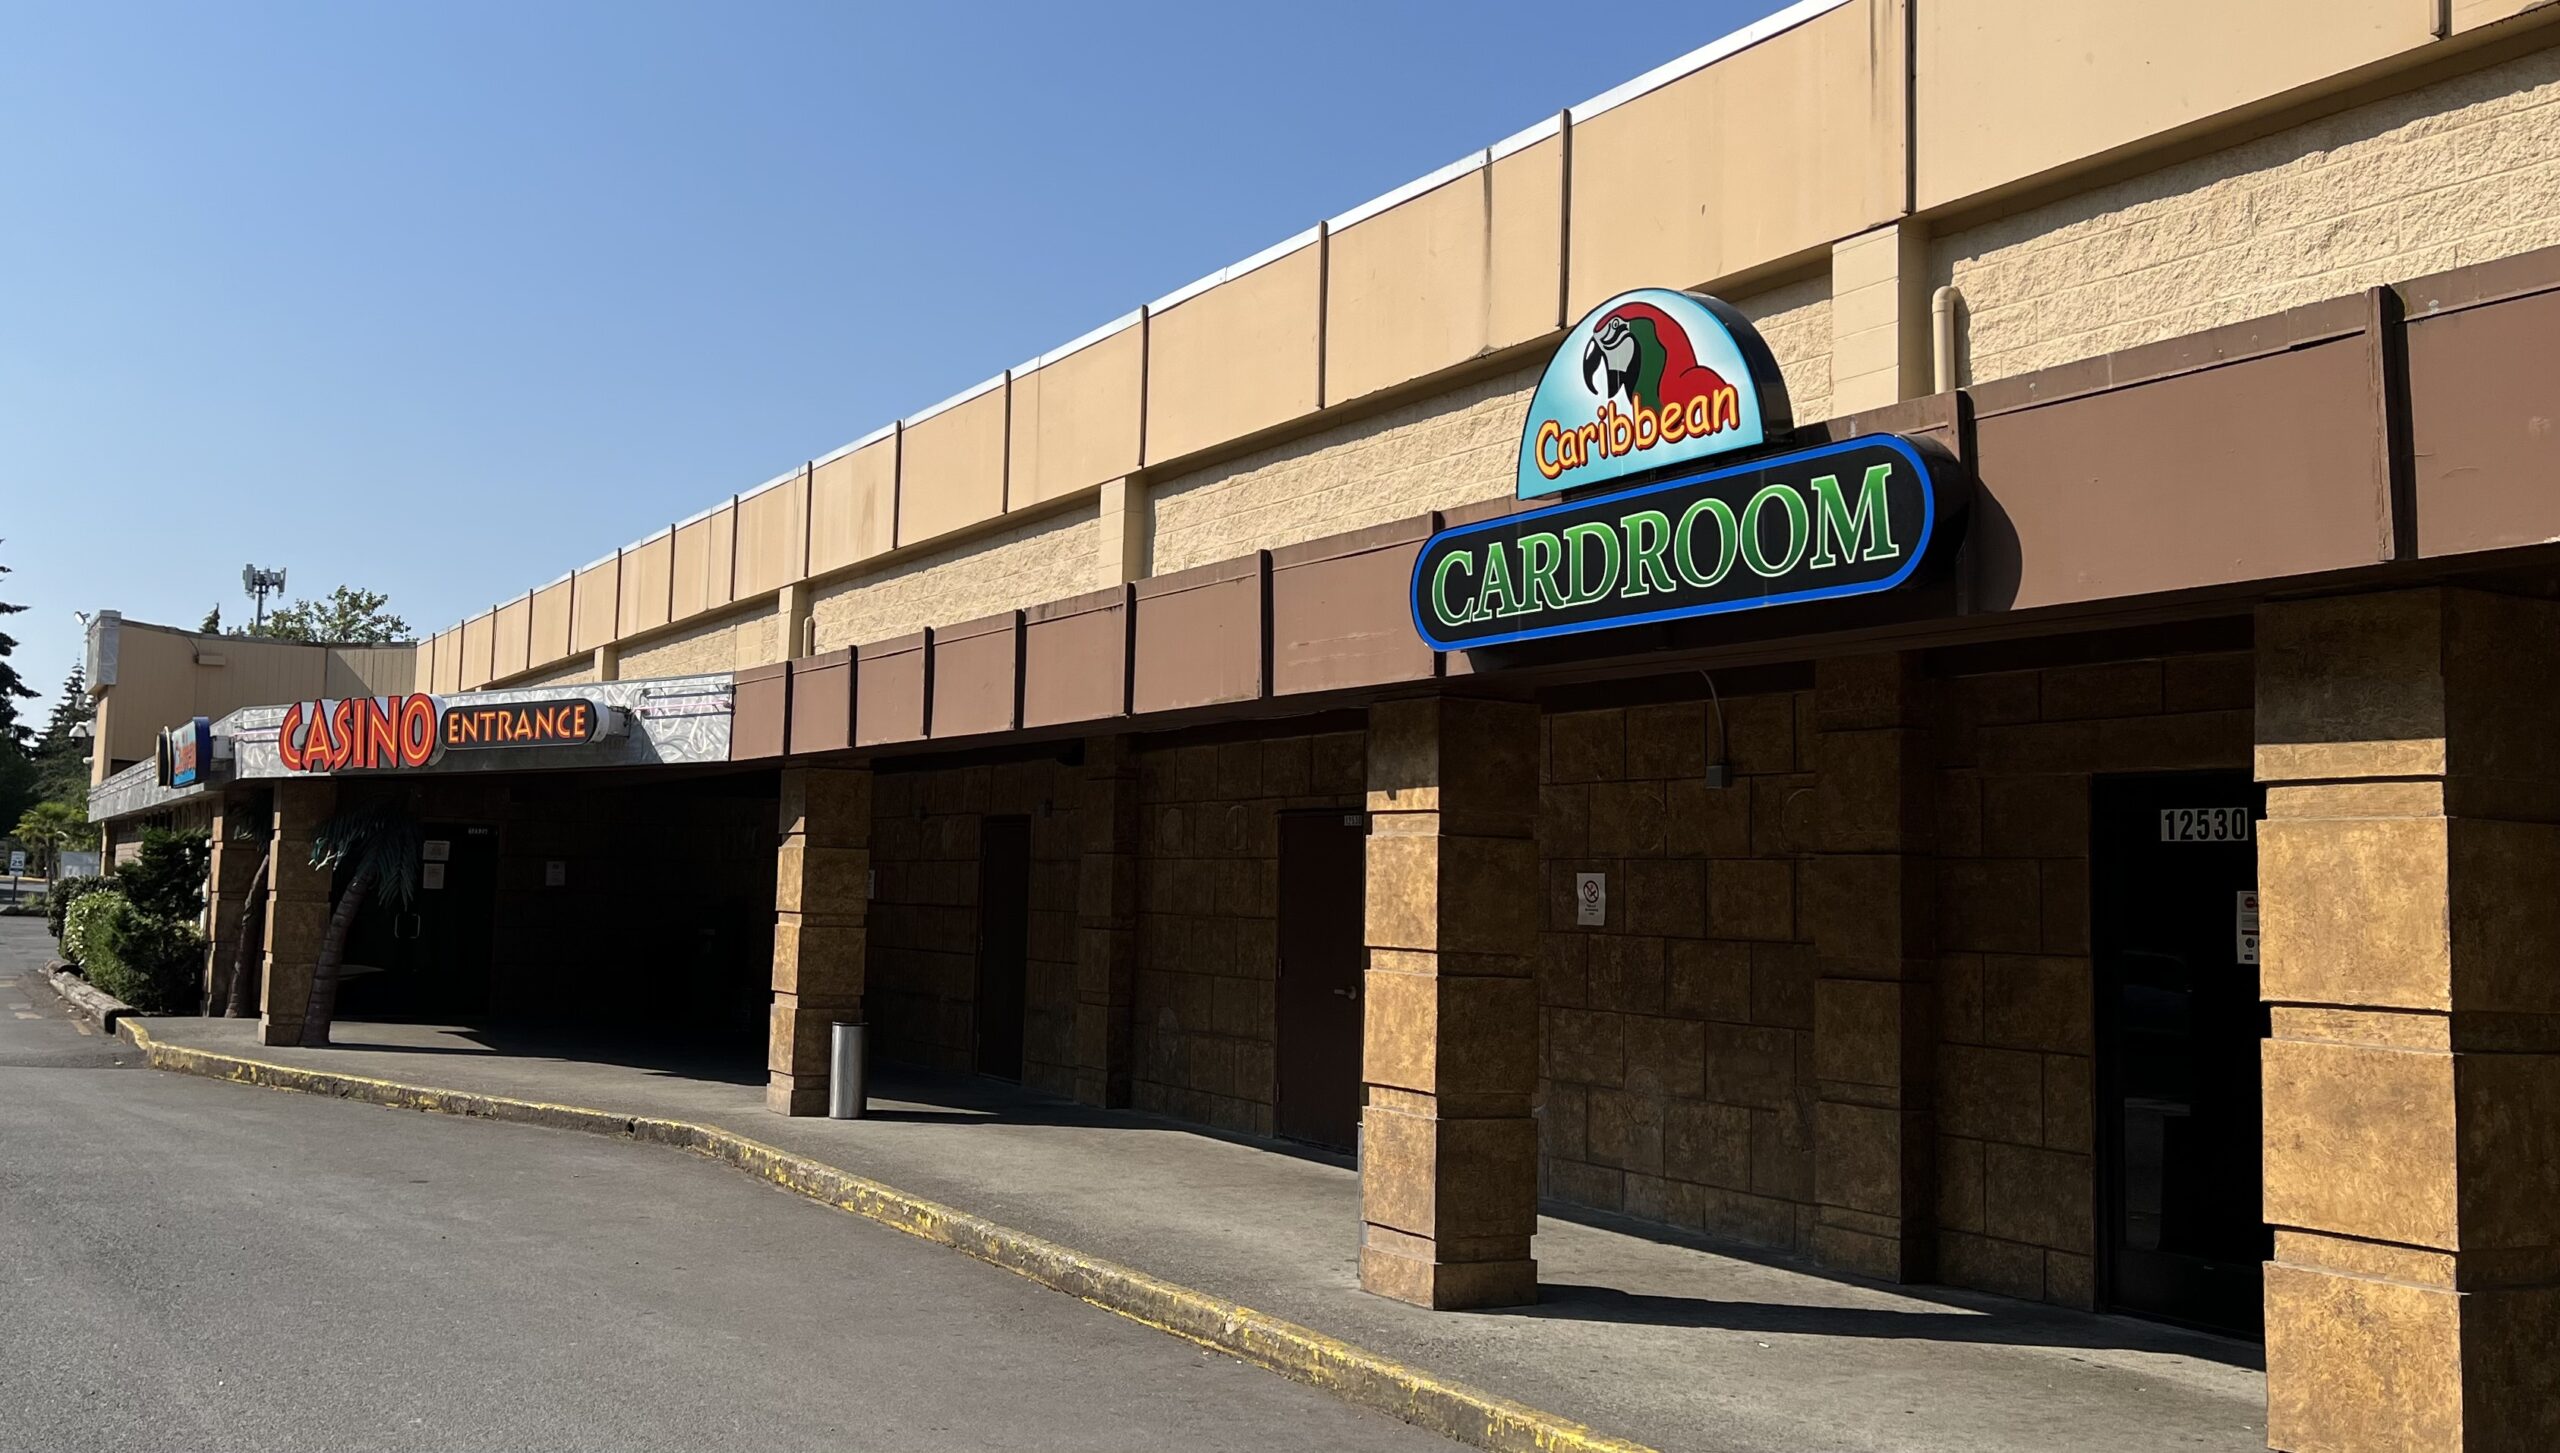 Rural Nevada casino owner sues to allow sports betting at his Washington cardrooms – The Nevada Independent